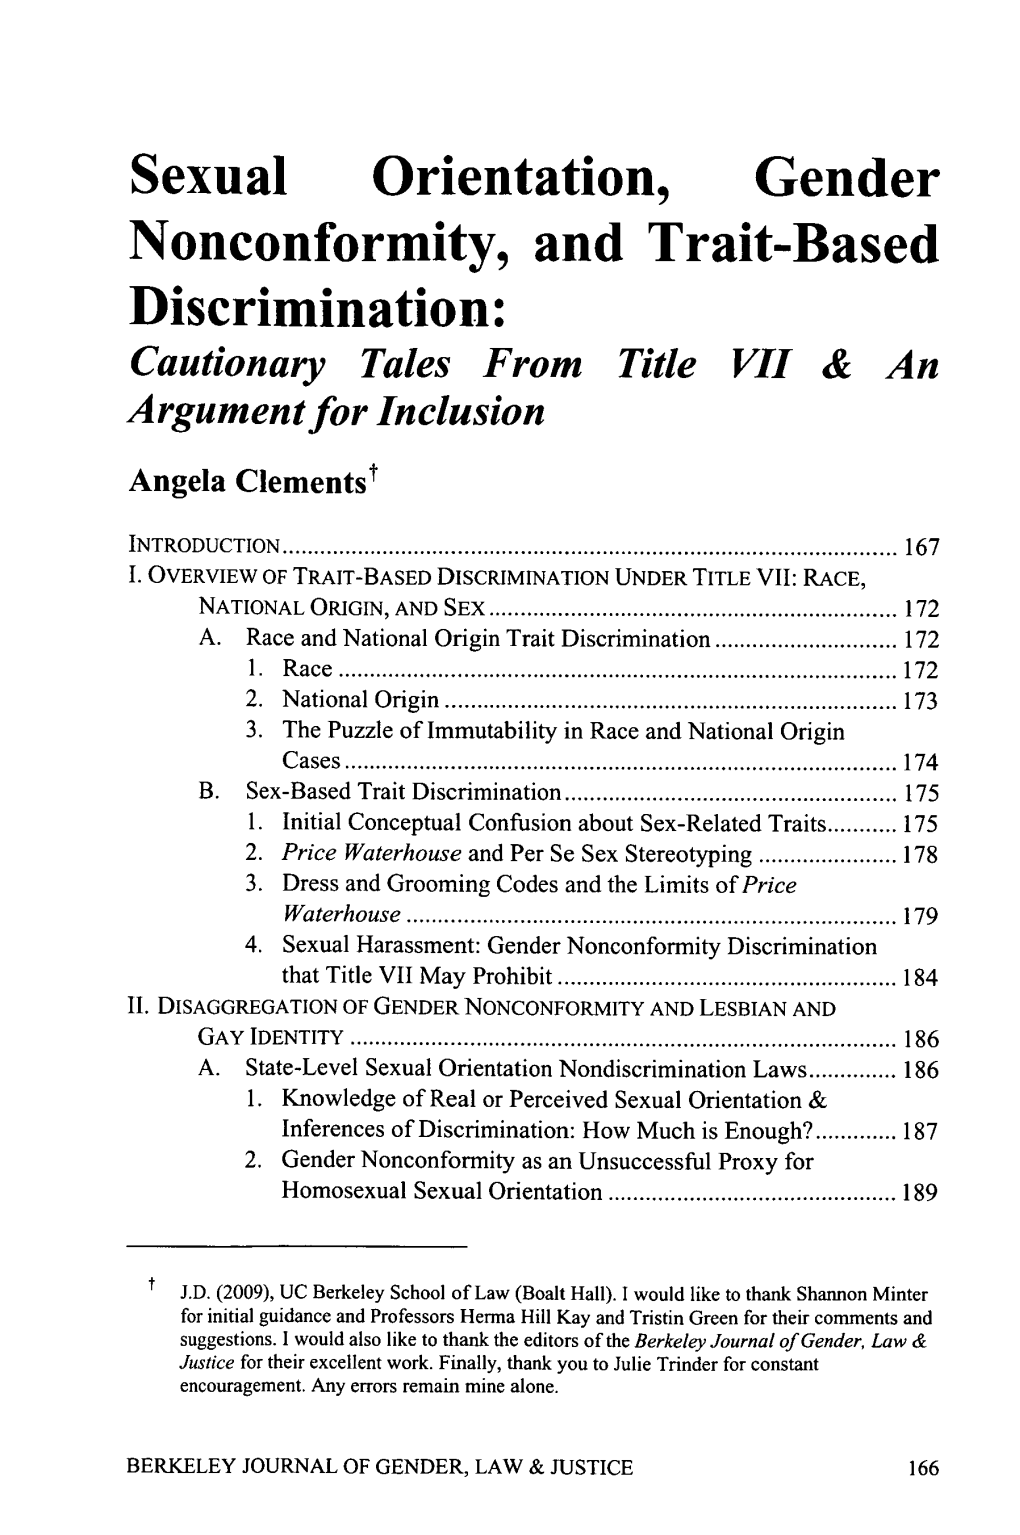 Sexual Orientation, Gender Nonconformity, and Trait-Based Discrimination: Cautionary Tales from Title VII & an Argument for Inclusion Angela Clementst